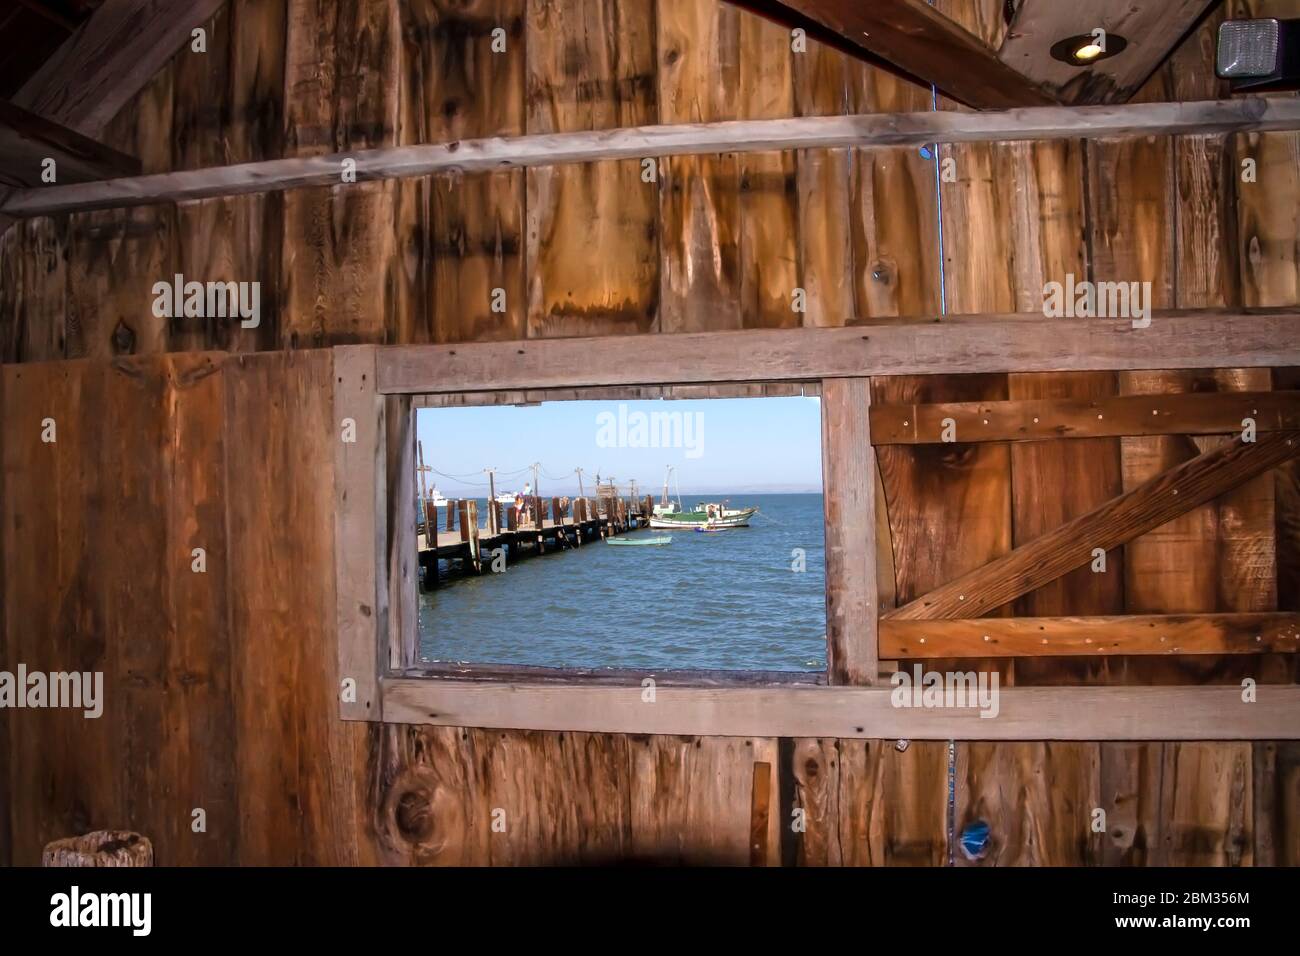 Blue ocean view with a pier and a boat from seen through a window inside an old wood shack Stock Photo